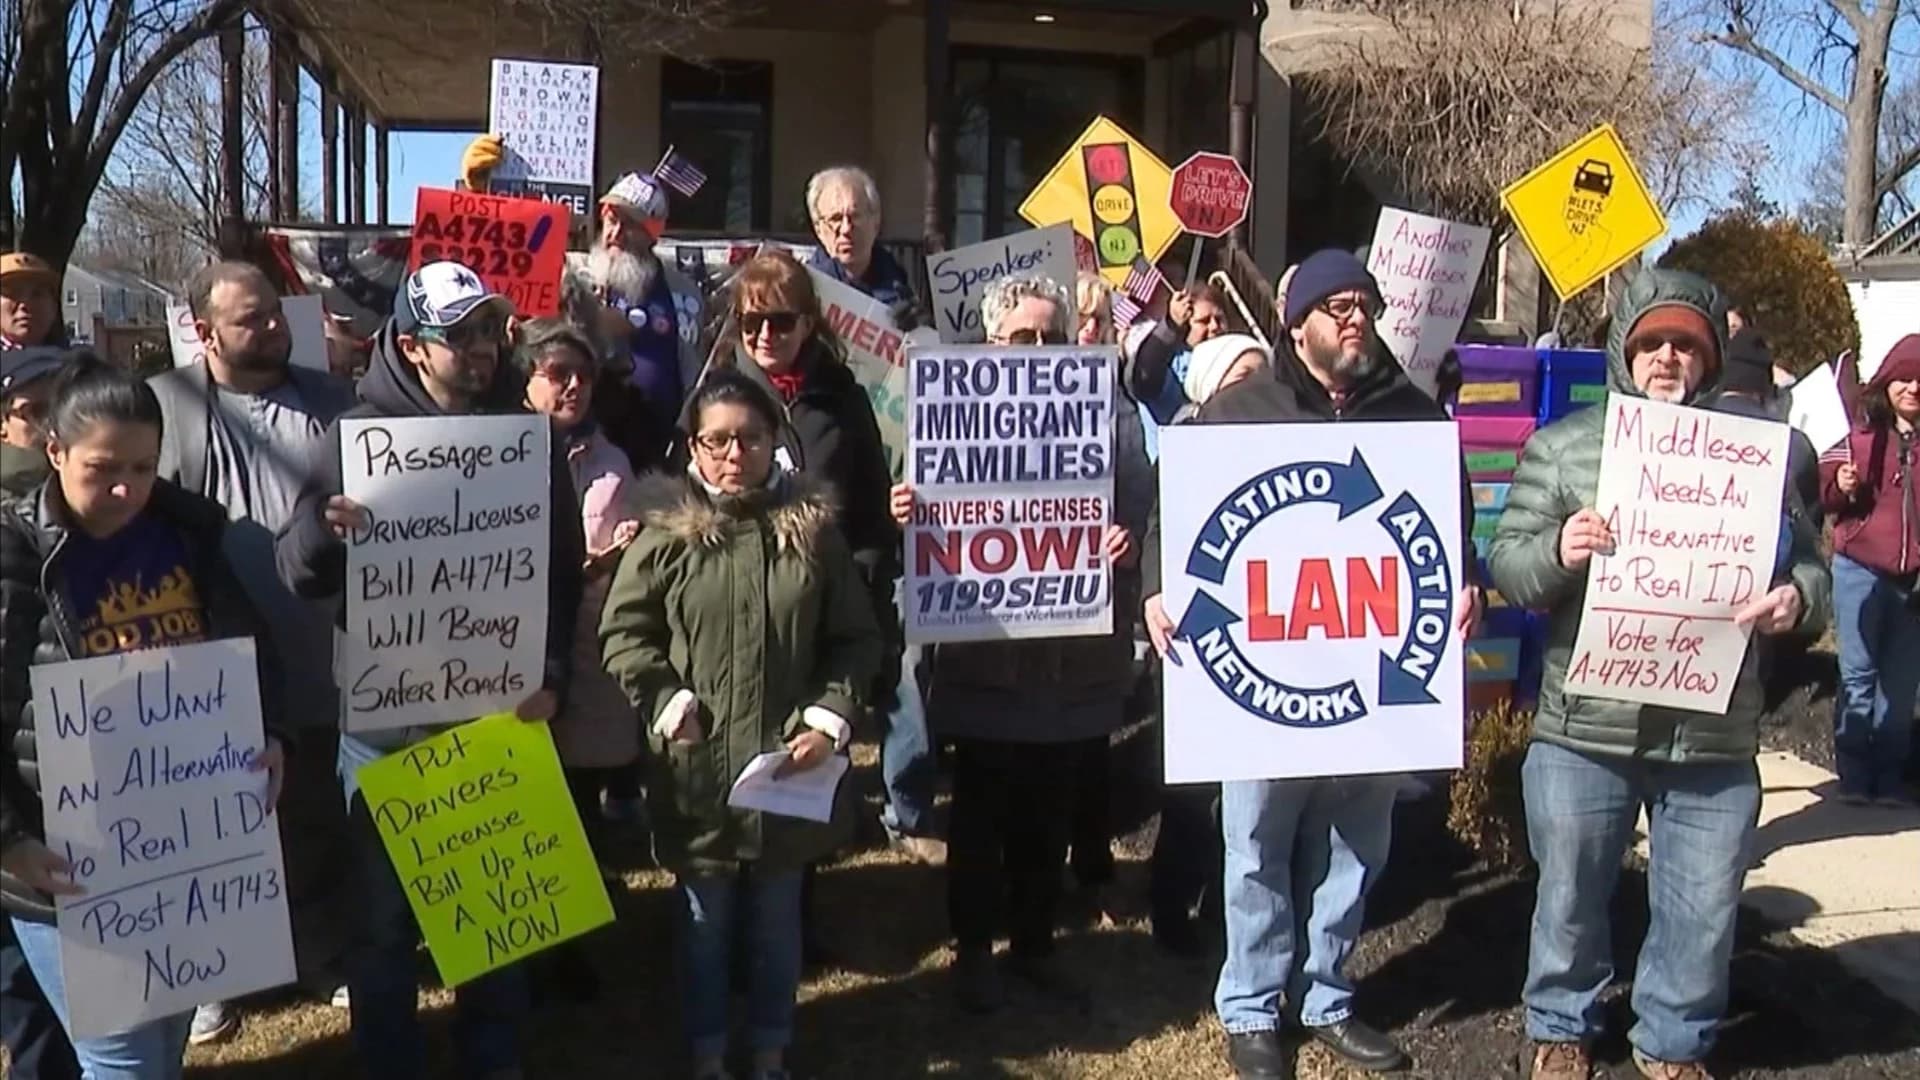 Activists hold rally in support of giving licenses to undocumented residents